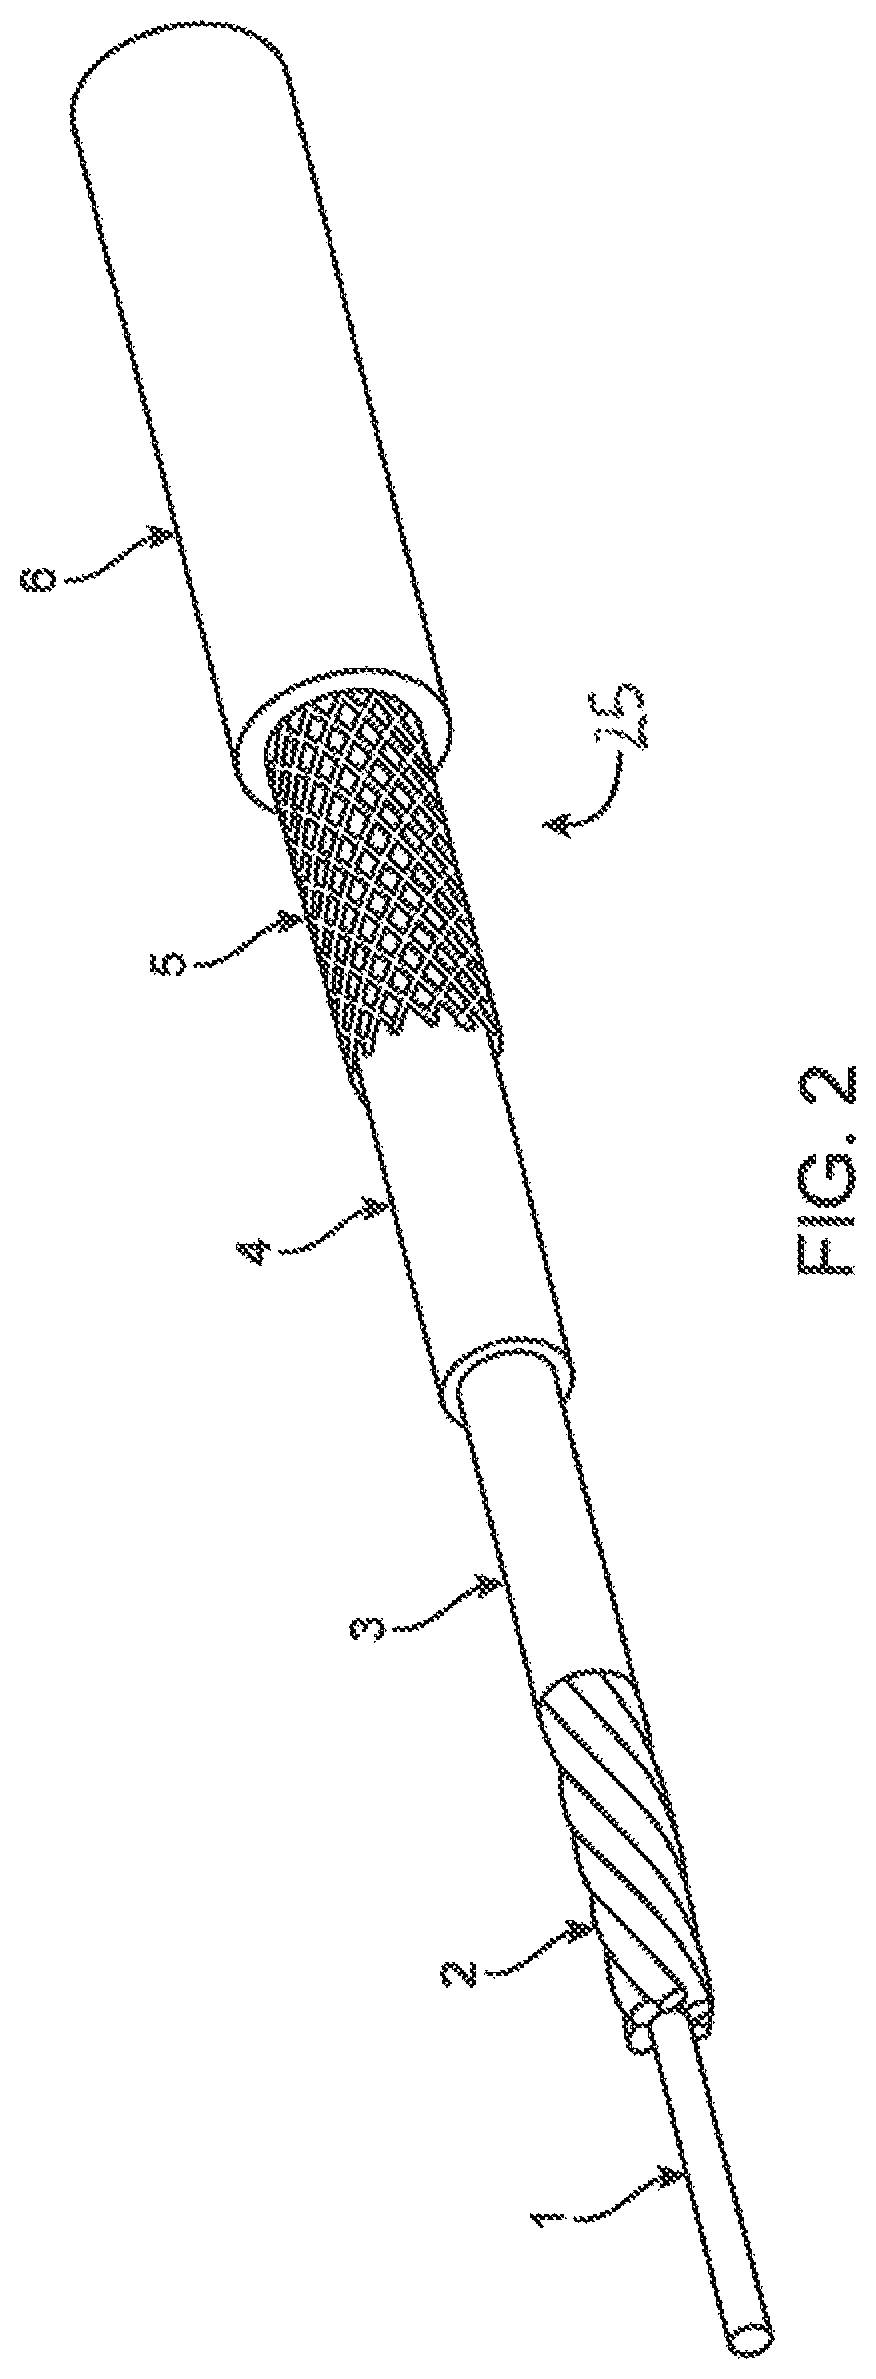 Fluid treatment system for a driveline cable and methods of assembly and use